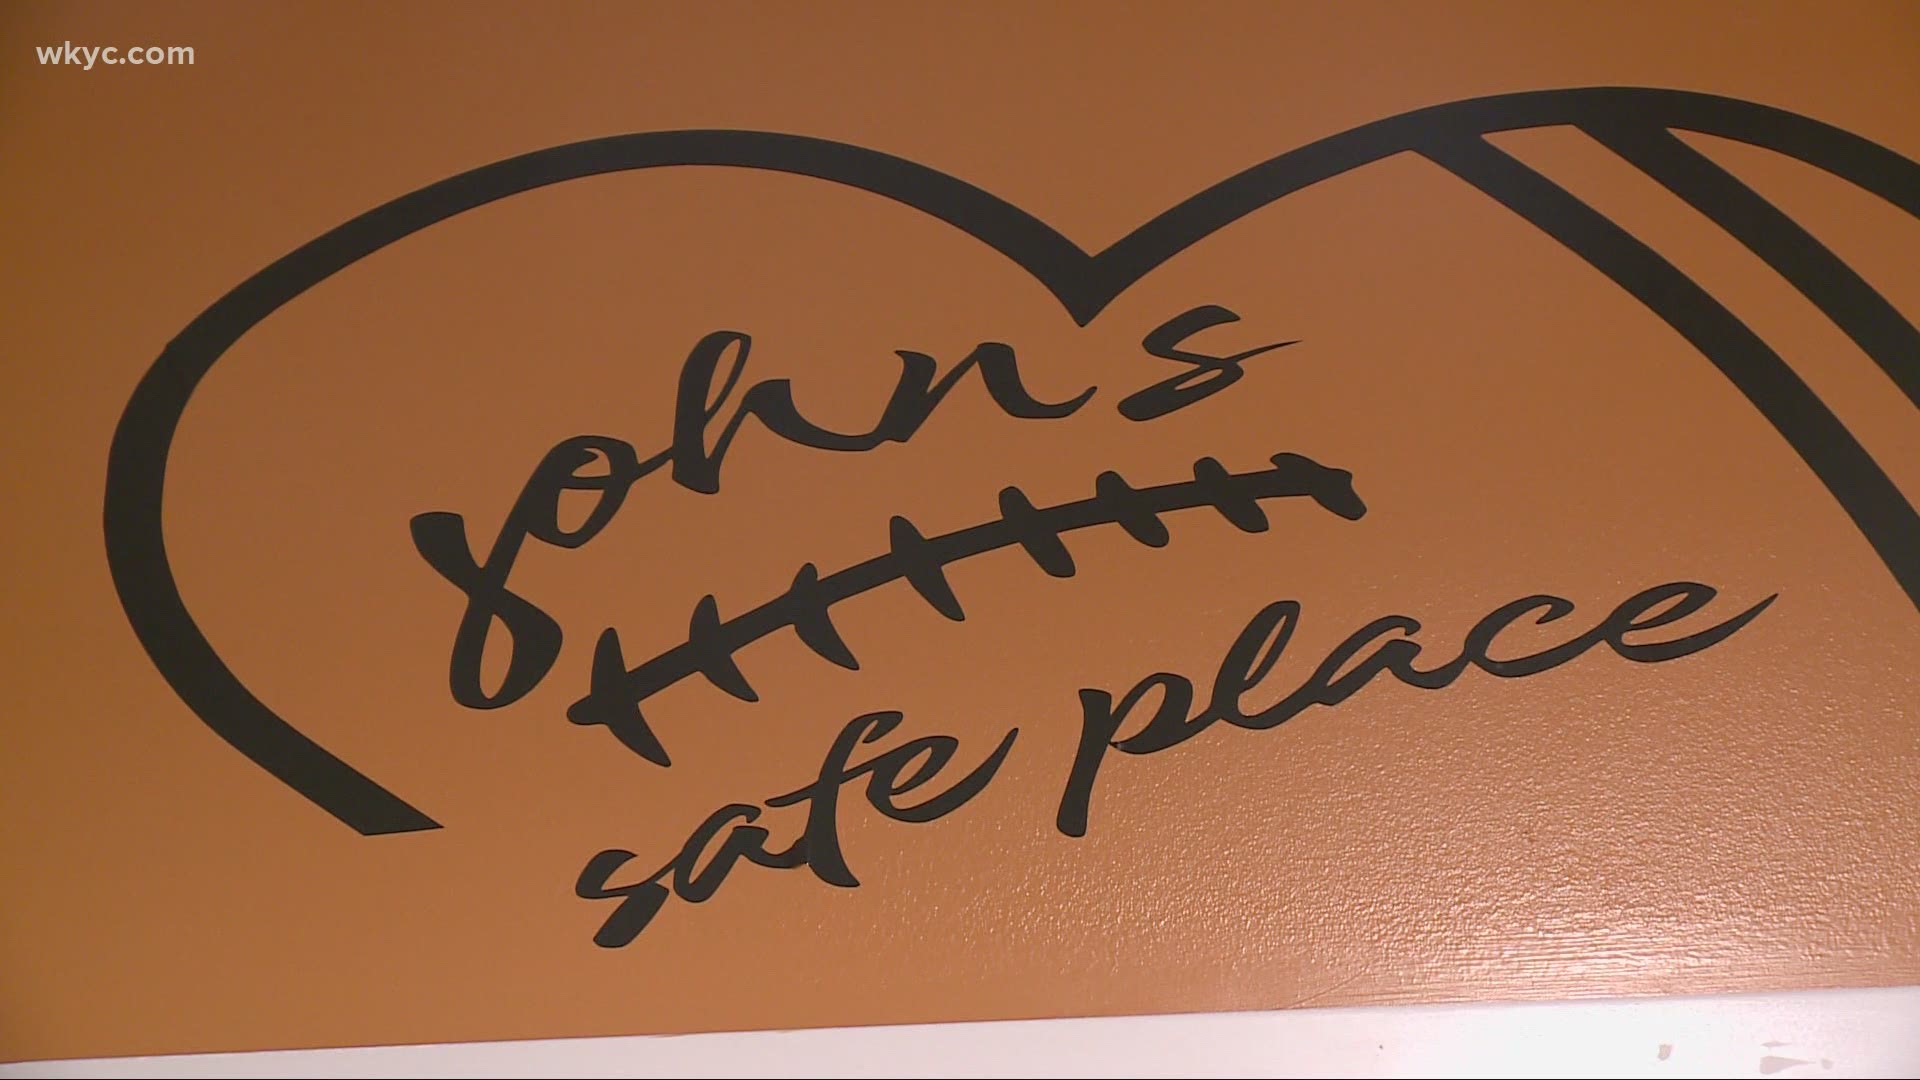 'John's safe places' are dedicated to John Haney, who took his life in 2017. 3News' Hollie Strano tells the story.